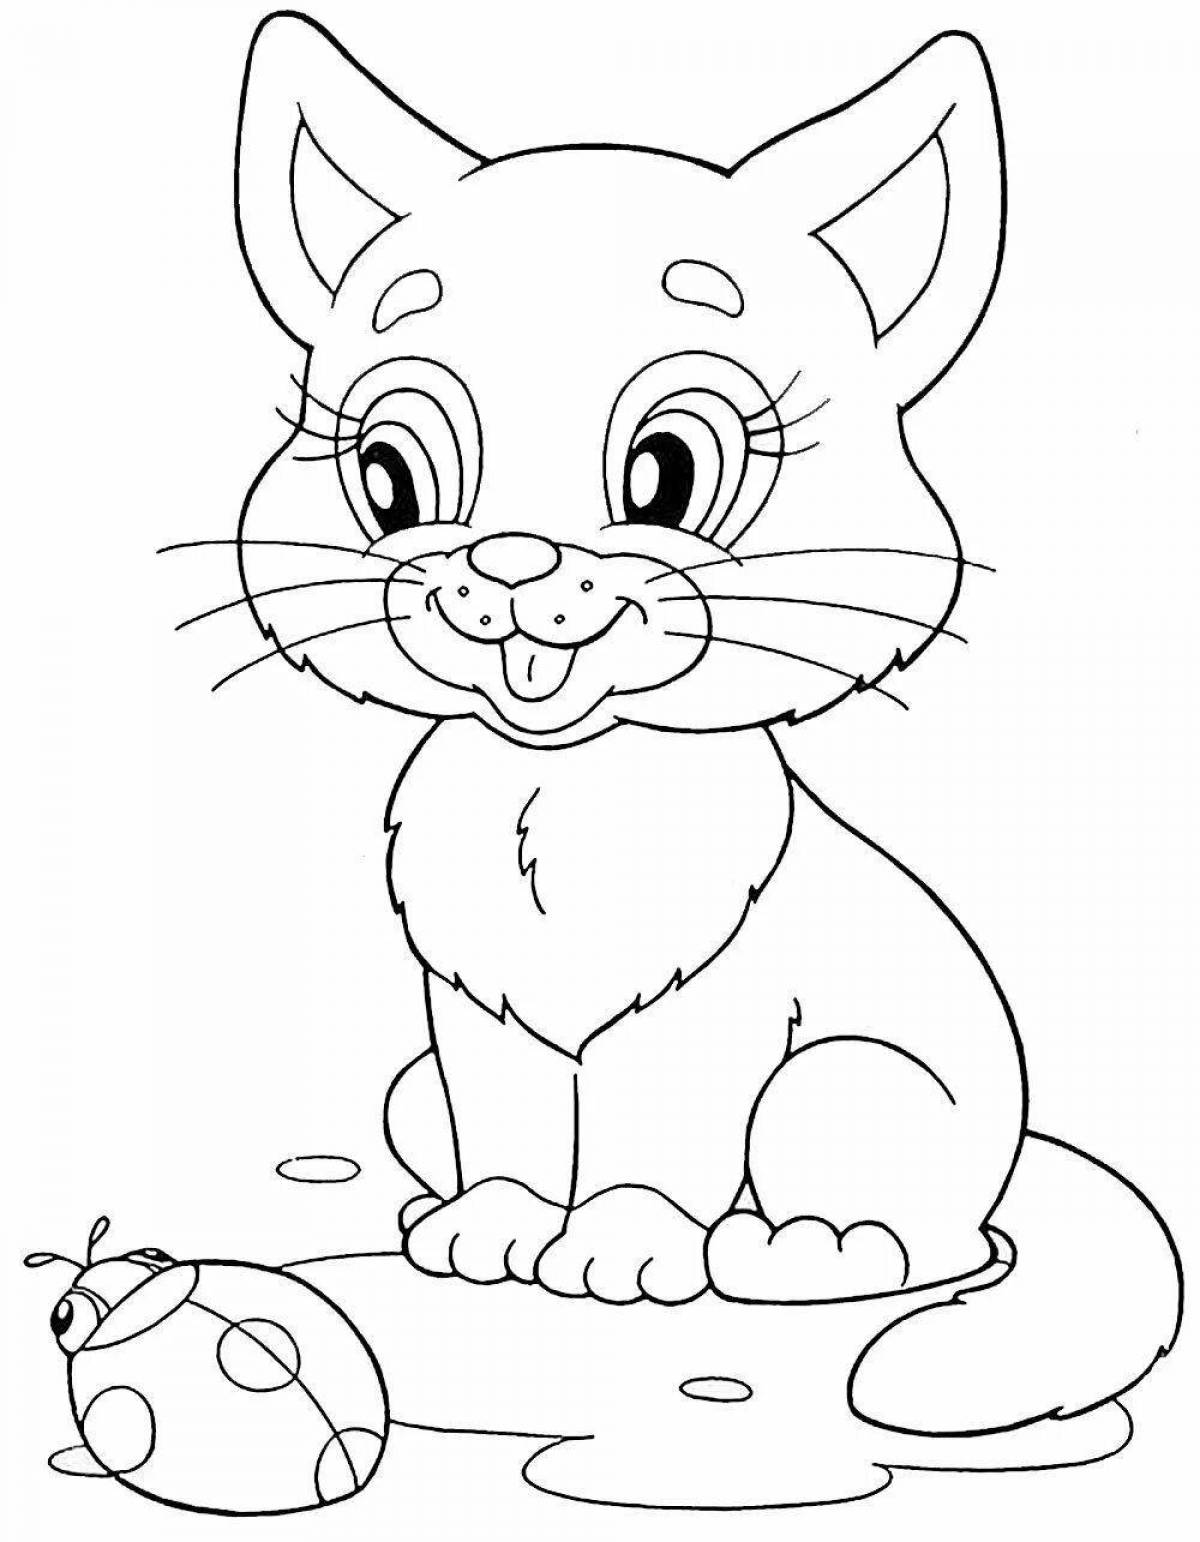 Crazy animal coloring pages for kids 6-7 years old